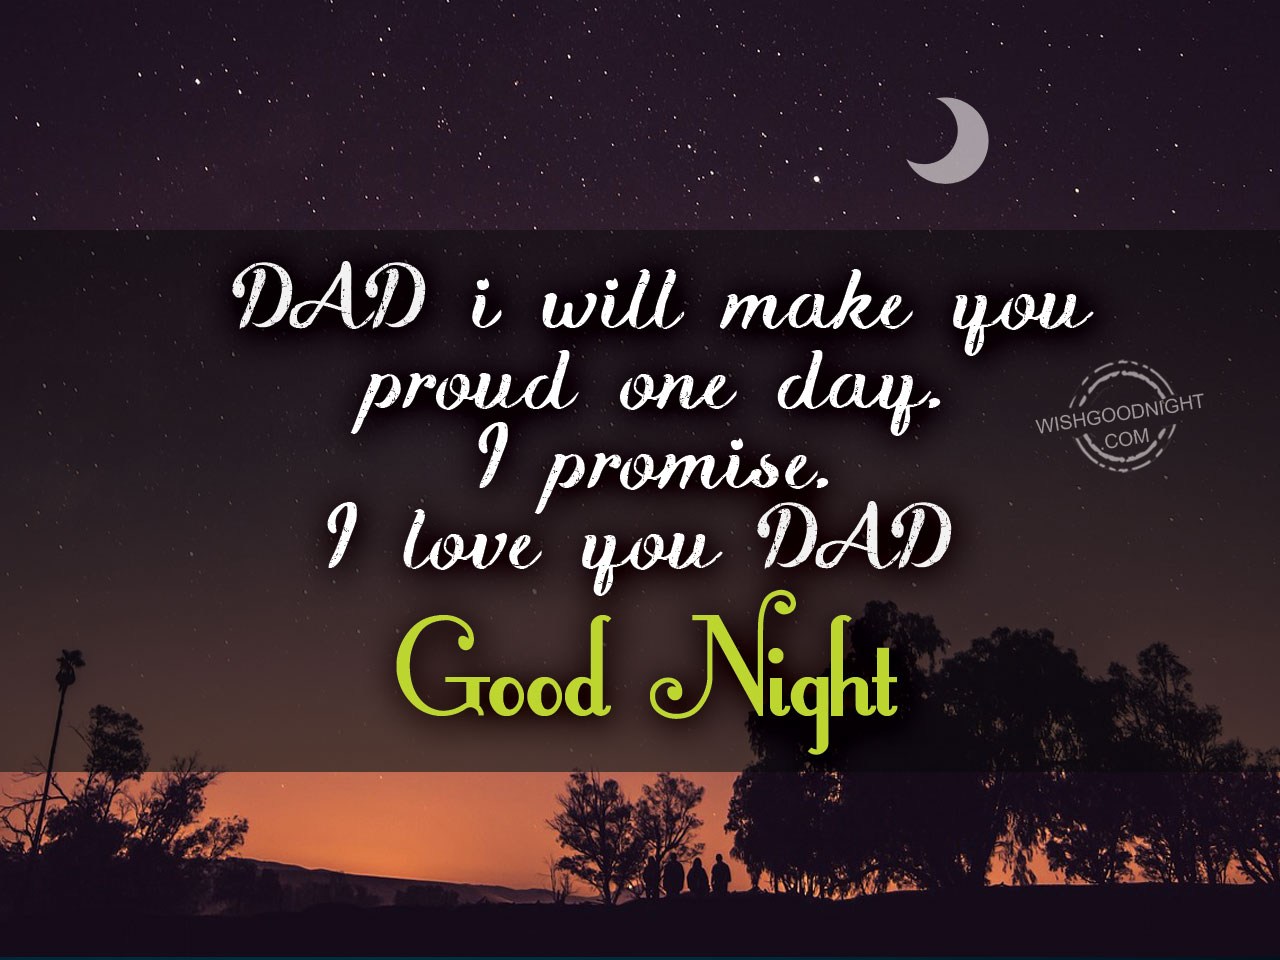 good night wishes message for dad